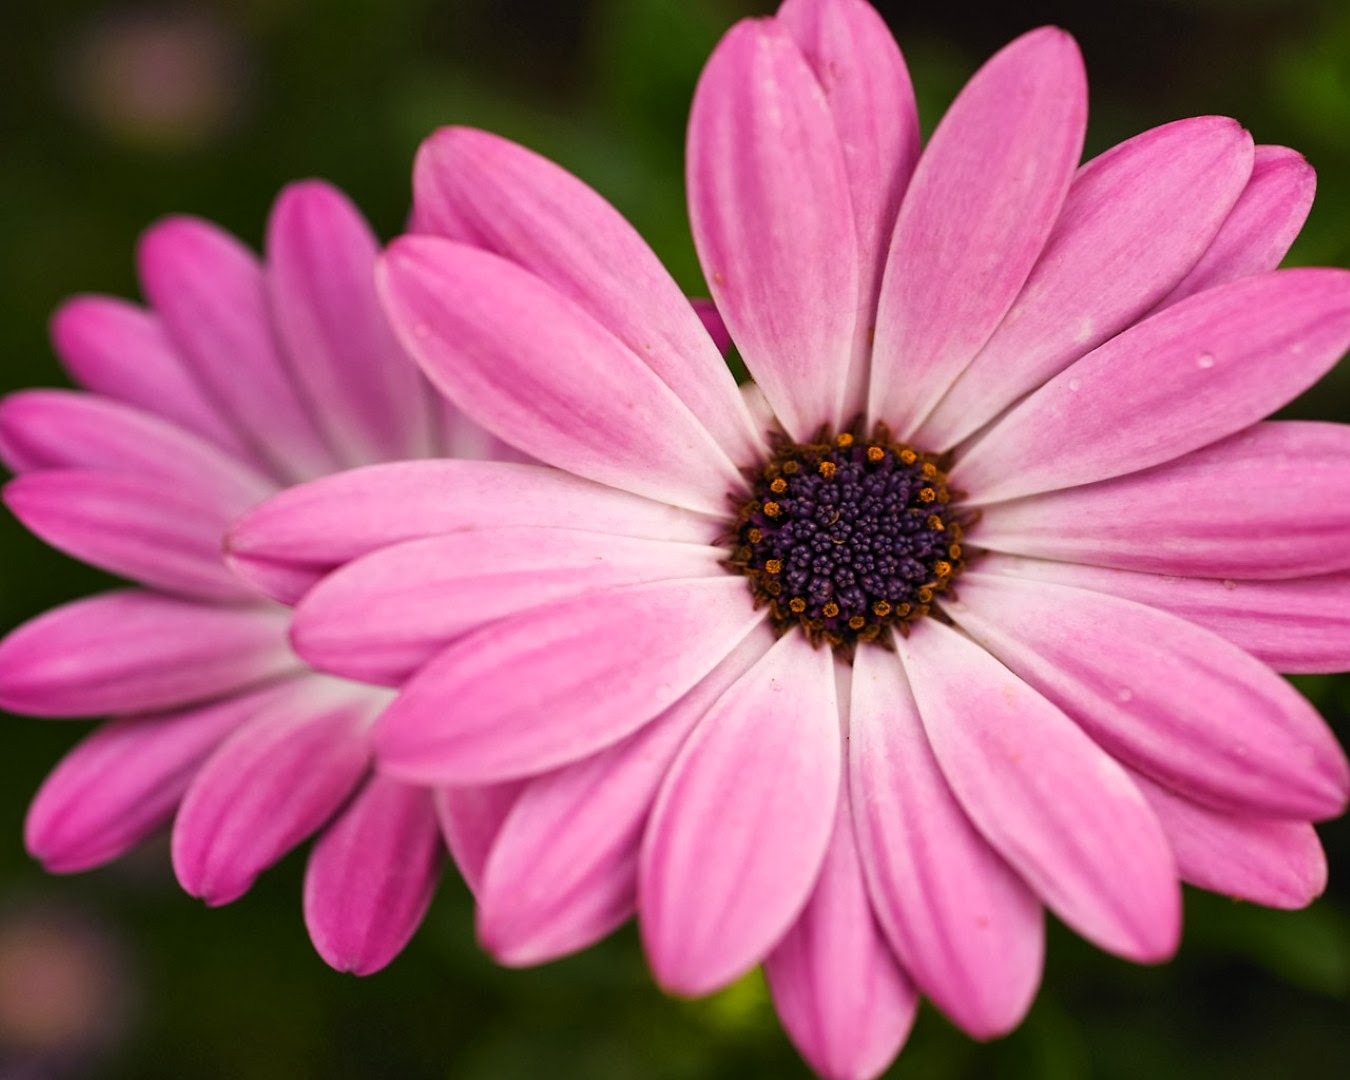 Hot Pink Flower Background | HD Wallpapers